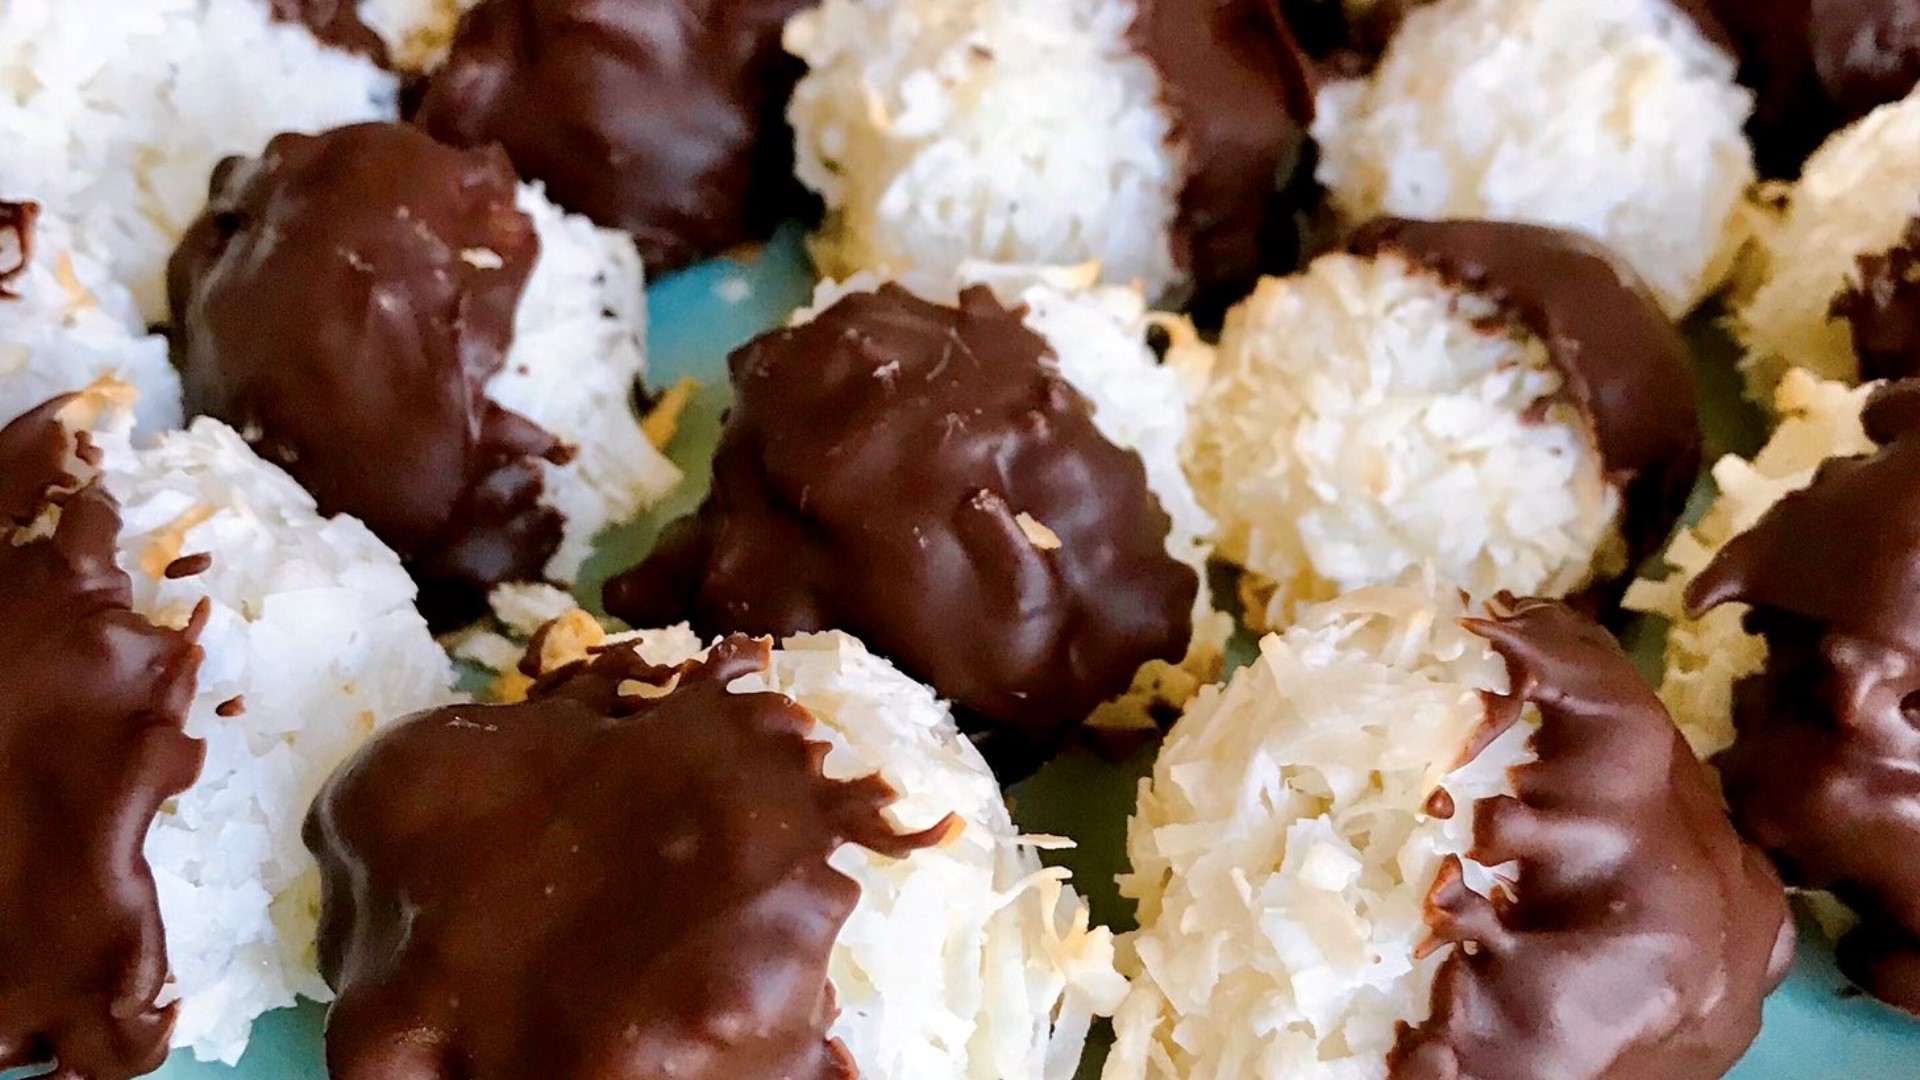 Easy, chocolate-dipped coconut macaroons that are perfect for Passover.